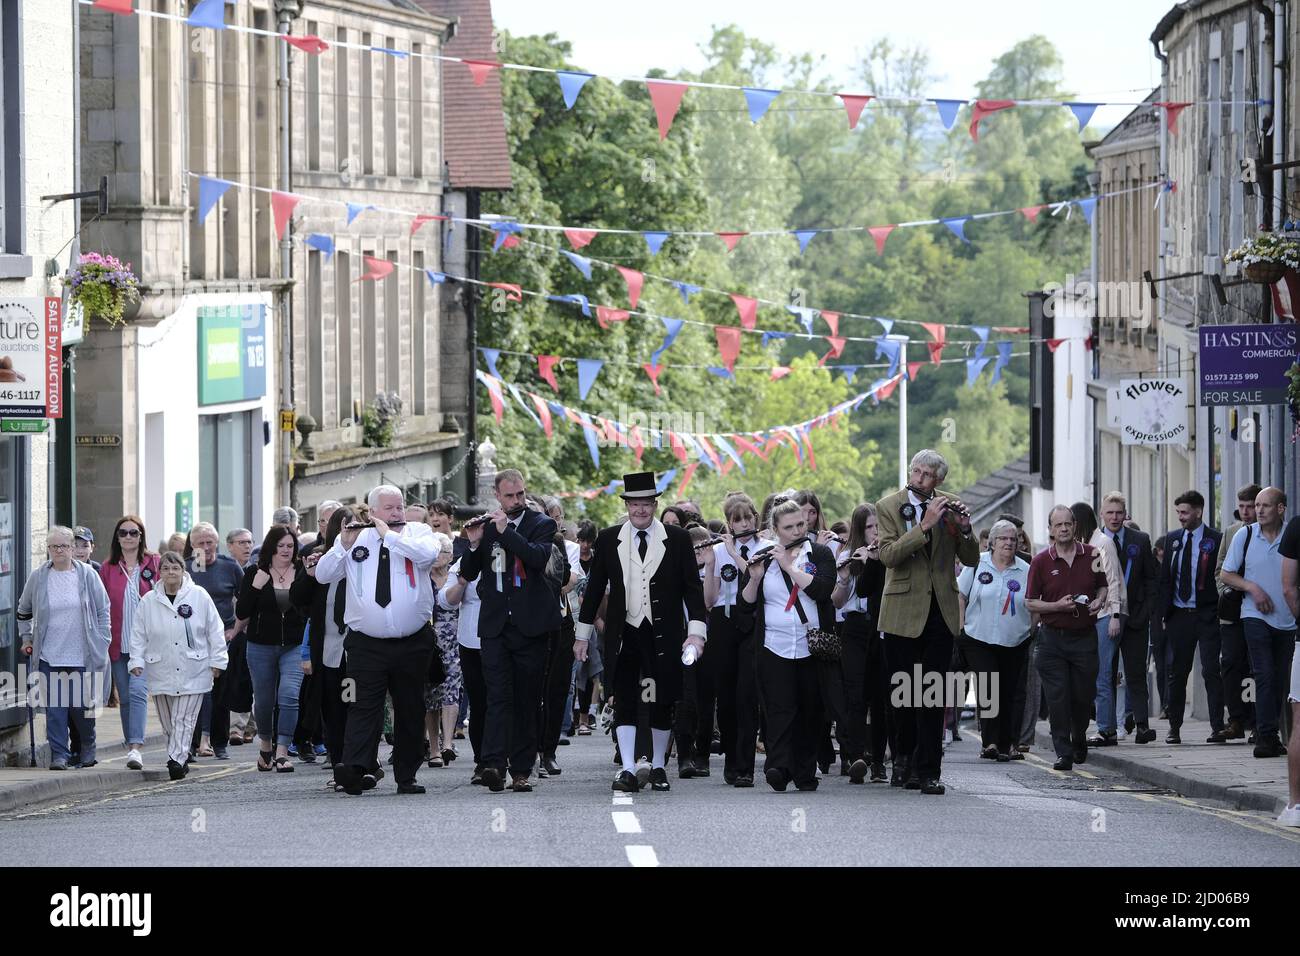 Selkirk, UK. 16.Jun.2022. Selkirk Common Riding 2022. Thursday, The Night afore the Morn. Senior Burgh Officer, Mr Graeme Bell led by the Flute band, preambles the streets starting in the West Port, at 1830hrs, stopping at significant junctions while walking a circuit of the Market Place, High Street, Back Row, Kirk Wynd for the 'Crying of the Burley' and then onwards to the Victoria Halls, for the United Crafts Colour Bussin. At 2000hrs during the proceedings the Selkirk Ex-Royal Burgh Standard Bearers form up in a parade to march to the 'Fletcher Memorial' and lay a wreath and mark respec Stock Photo